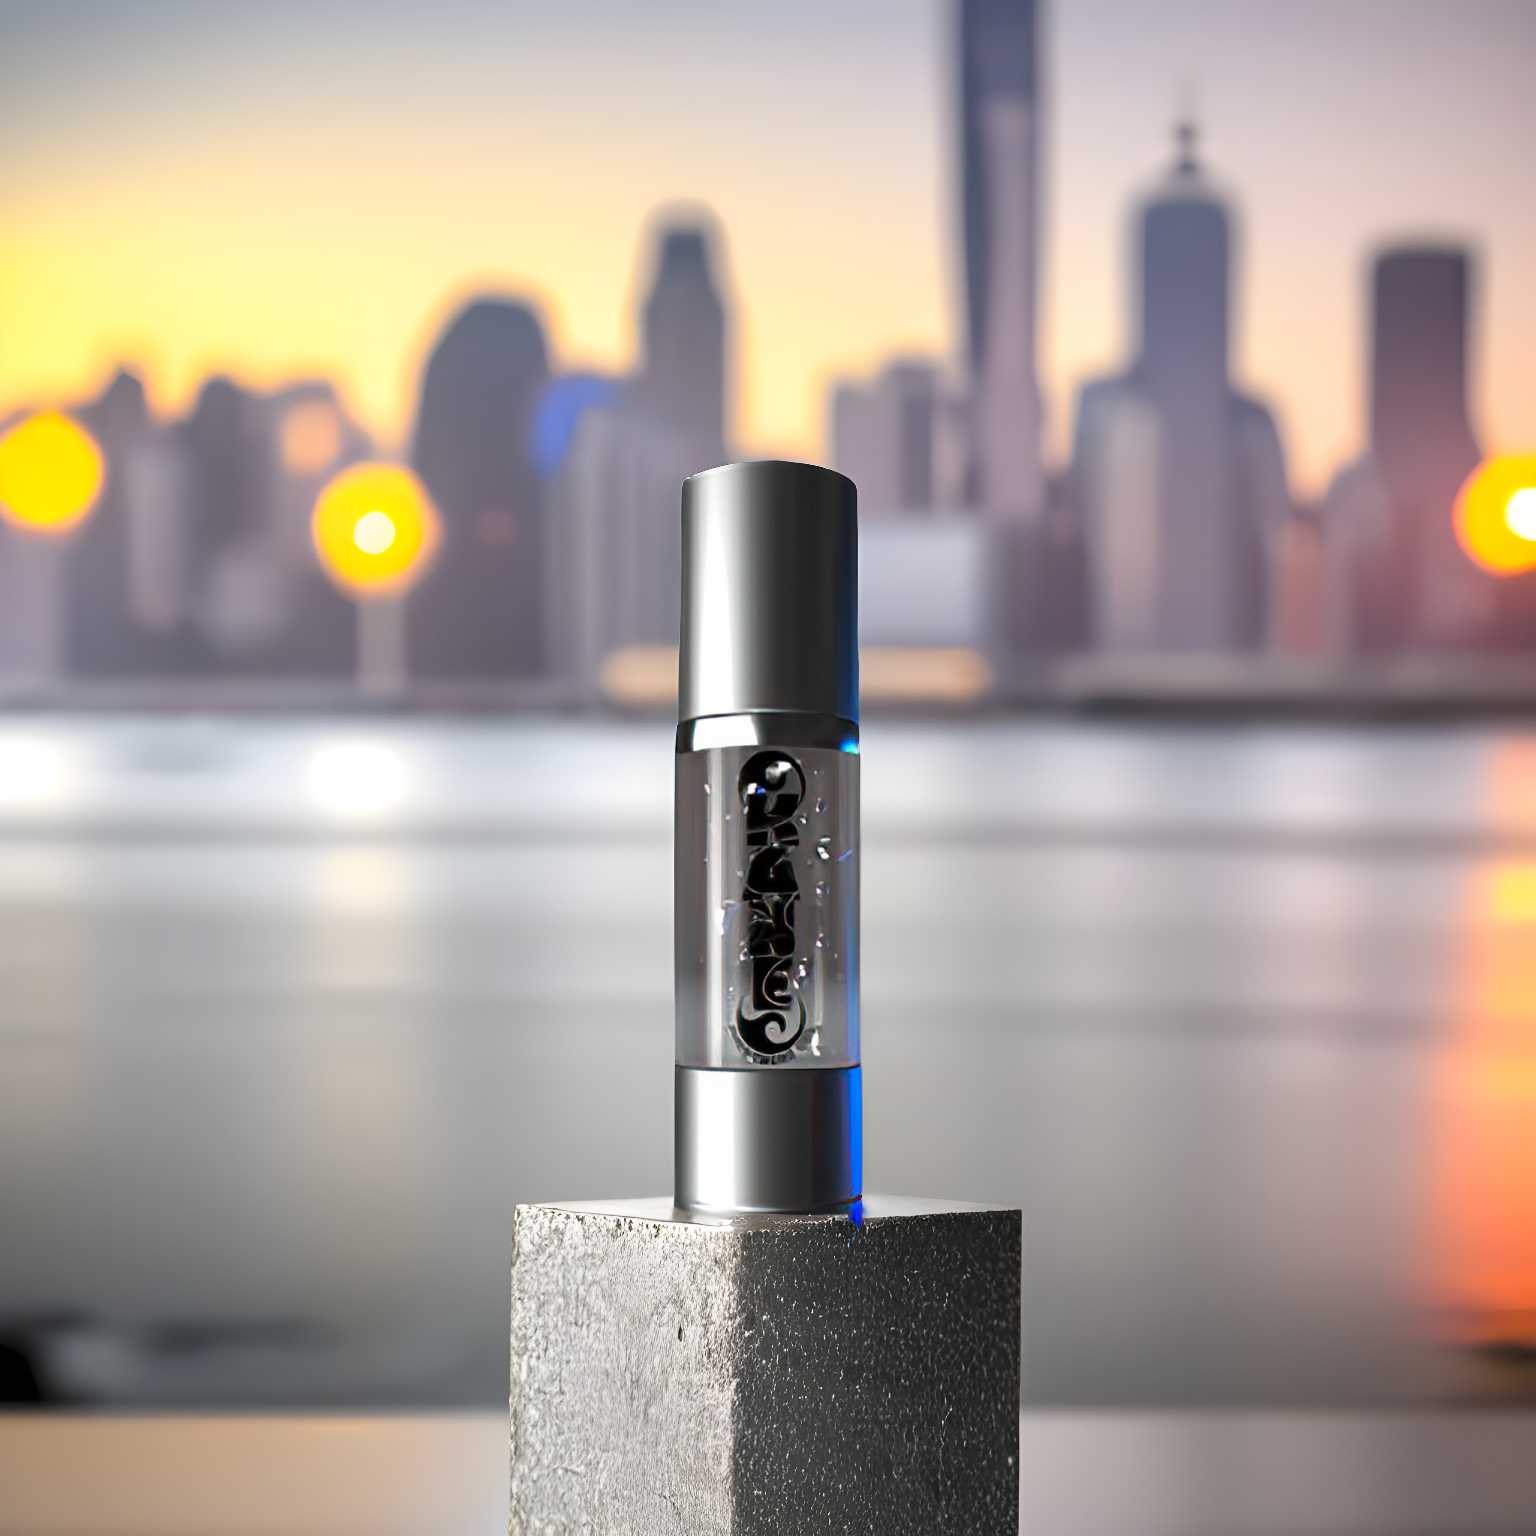 KANE™ Pheromone Gel by Royal Pheromones in a sleek bottle, set against a cityscape background at sunset, designed to enhance respect and communication for the wearer.